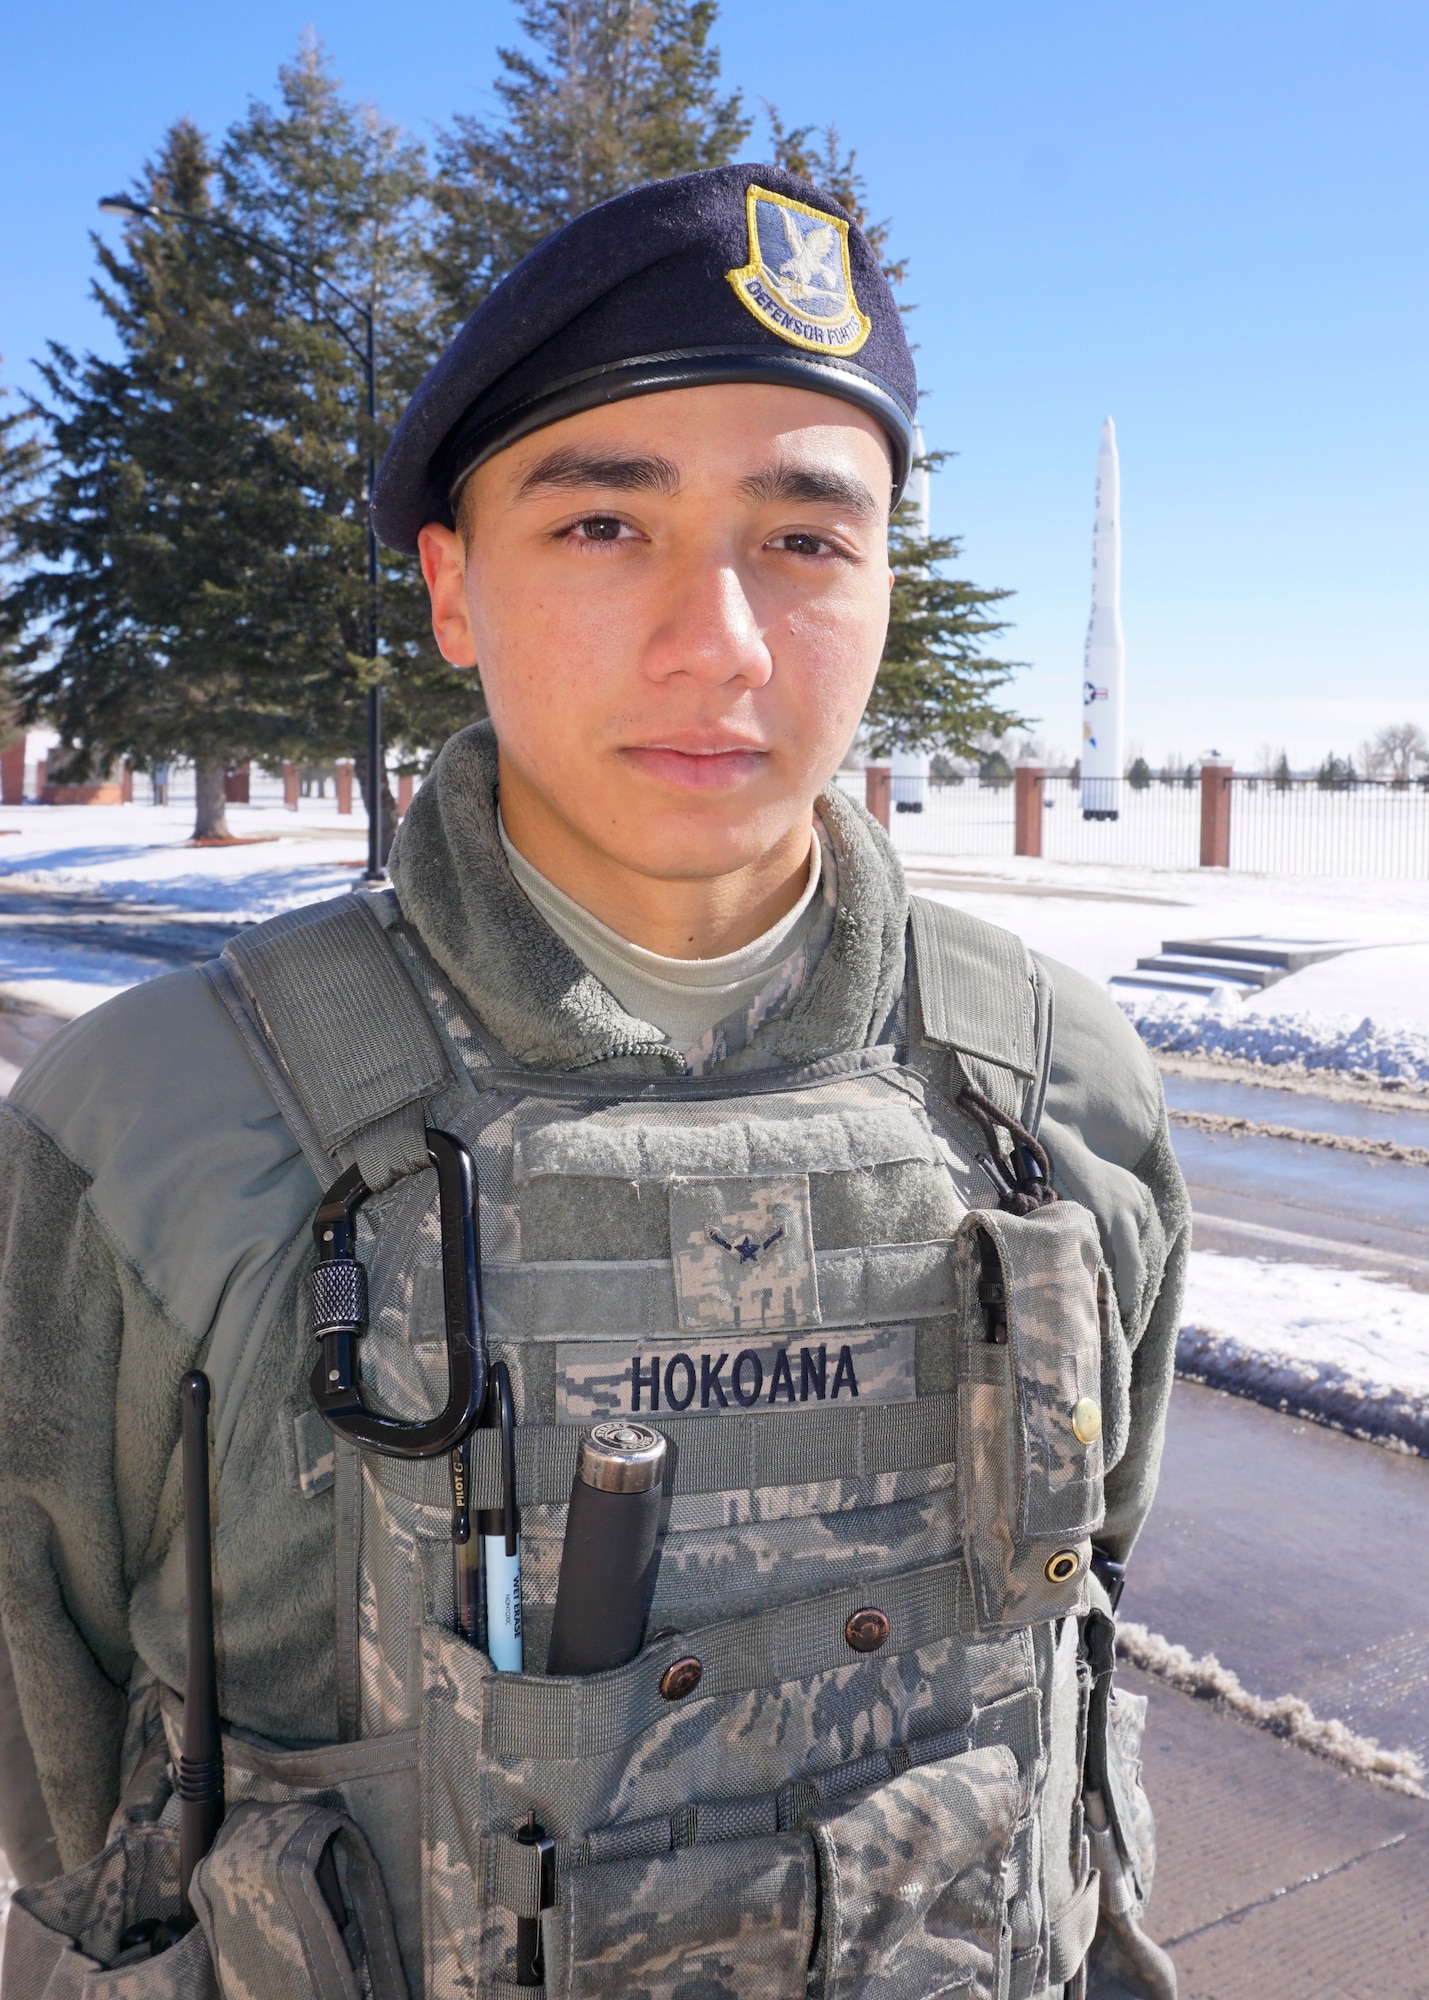 Airman Kaiea Hokoana, 90th Security Forces Squadron, poses for a portrait on F.E. Warren Air Force Base, Wyo., Feb. 23, 2015. Hokoana provides safety and security for the base population as a gate guard. (U.S. Air Force photo by Lan Kim)
